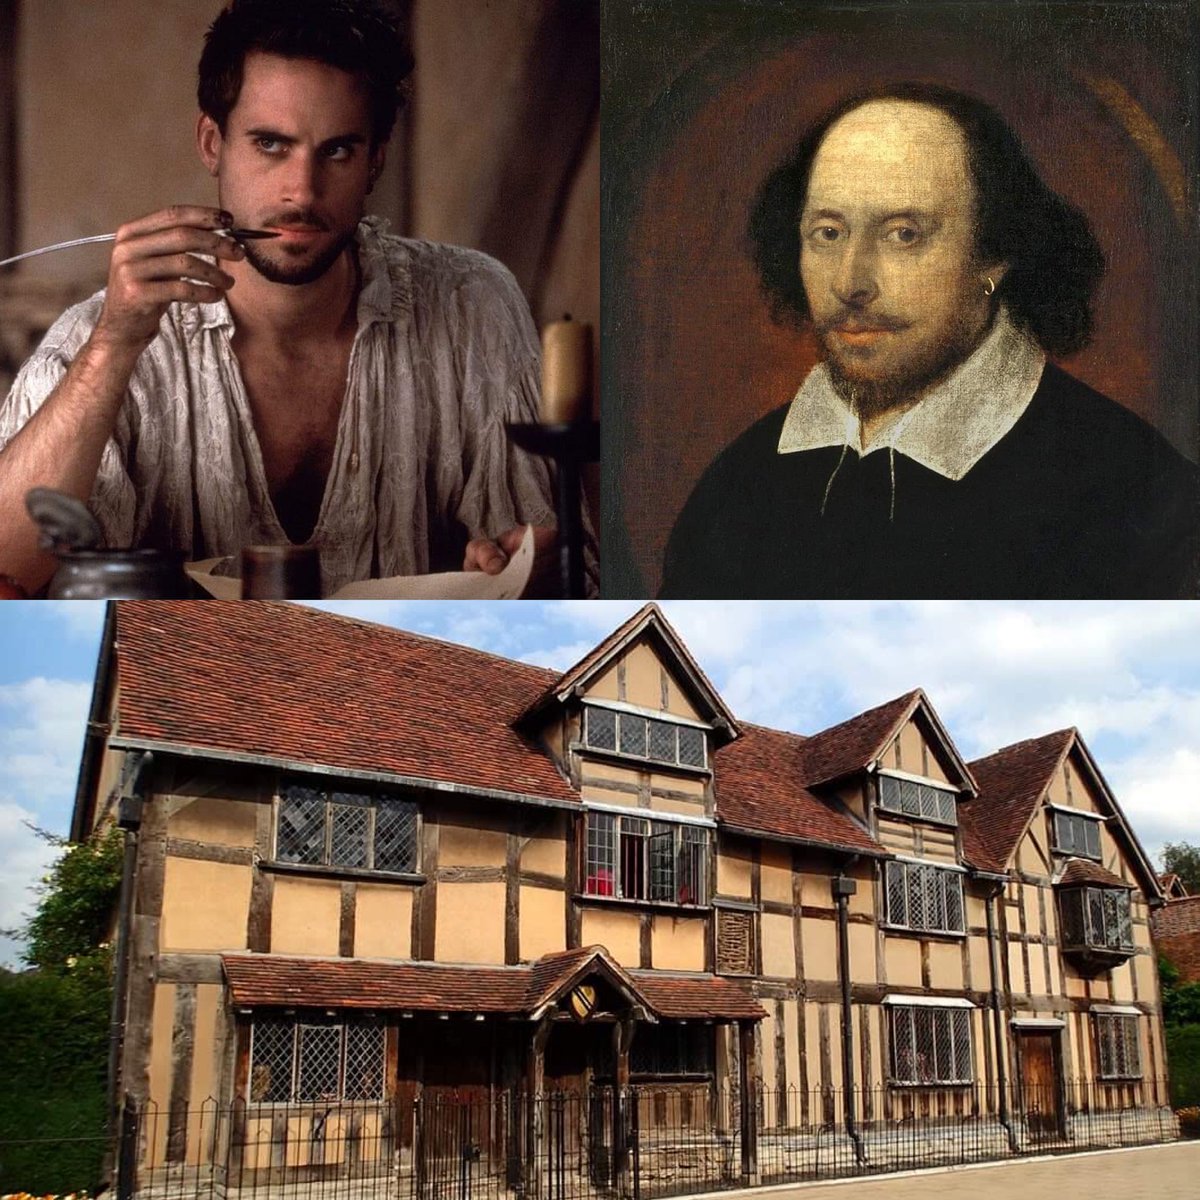 #OTD 23 Apr 1616 #WilliamShakespeare died aged 52 believed also to be his birthday! Remembered as one of the most influential #Elizabethan playwrights, poets & actors, arguable the greatest English writer of all time! His legacy lives on! @HollowCrownFans #ShakespeareSunday